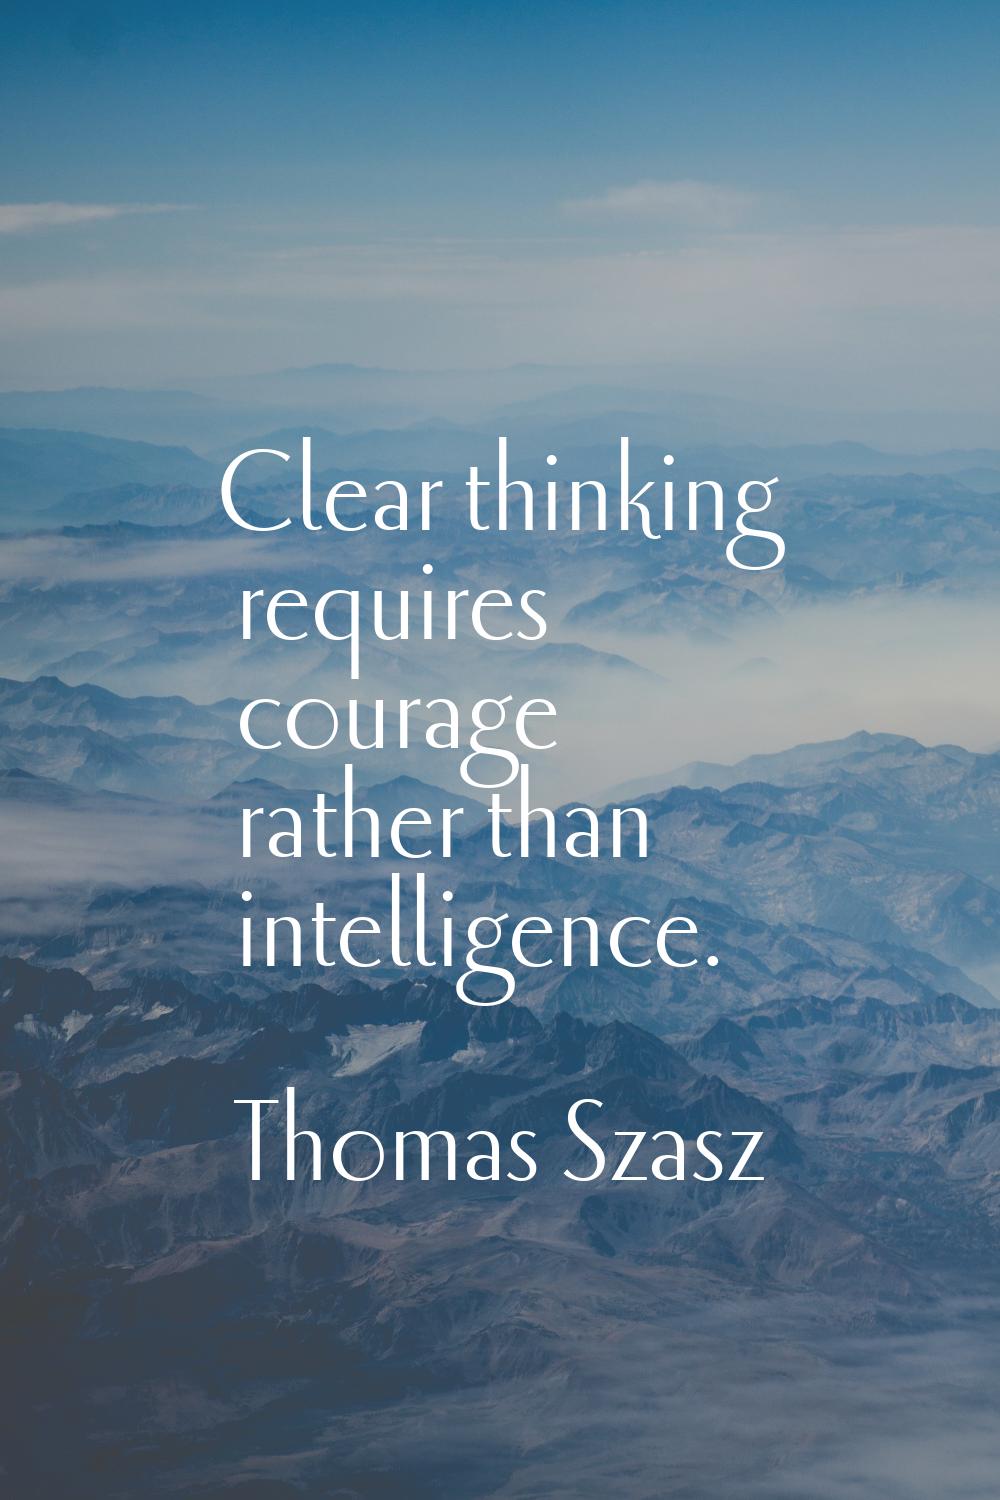 Clear thinking requires courage rather than intelligence.